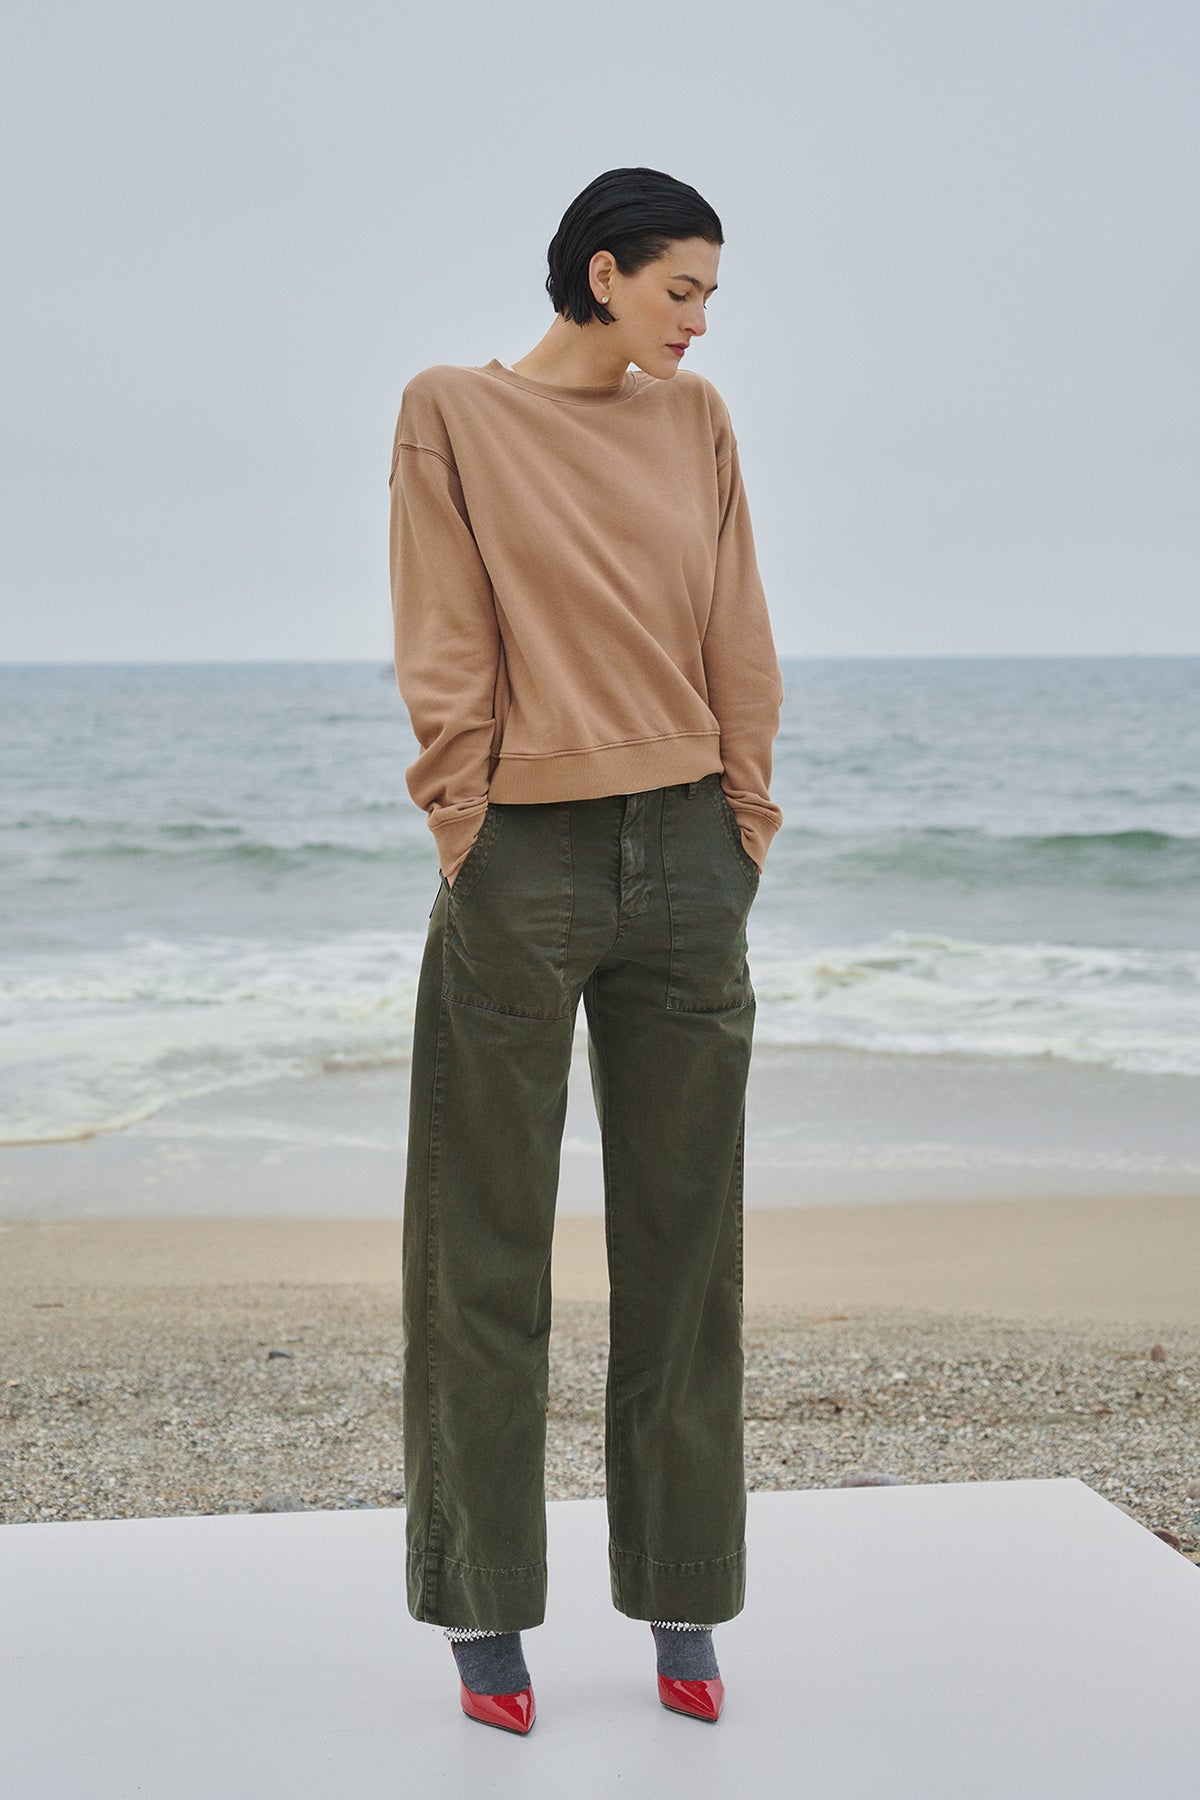 A woman is standing on a beach wearing a Velvet by Jenny Graham VENTURA PANT, a cotton twill wide leg pant.-35547466432705